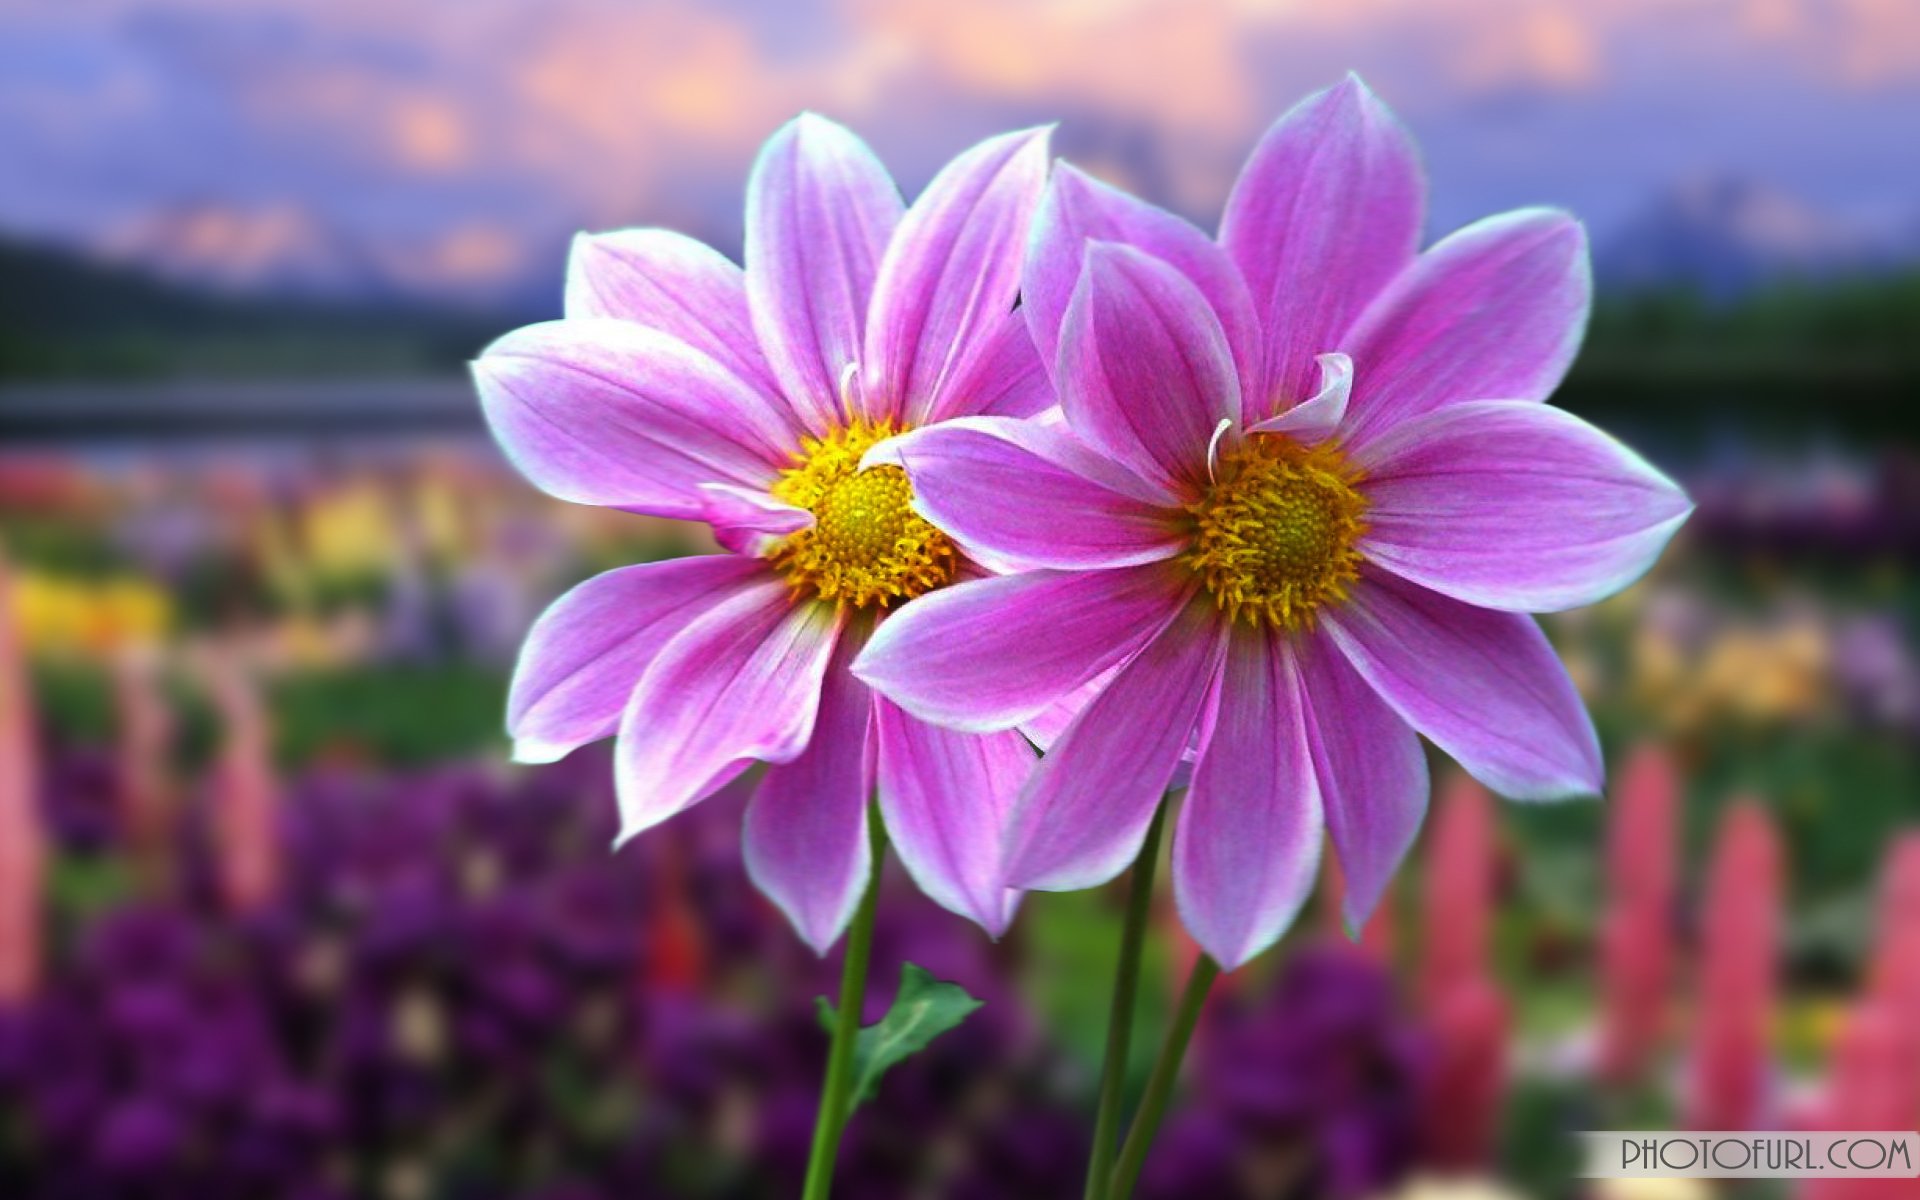  Screen Laptops Background Beautiful Colorful Flowers HD wallpapers